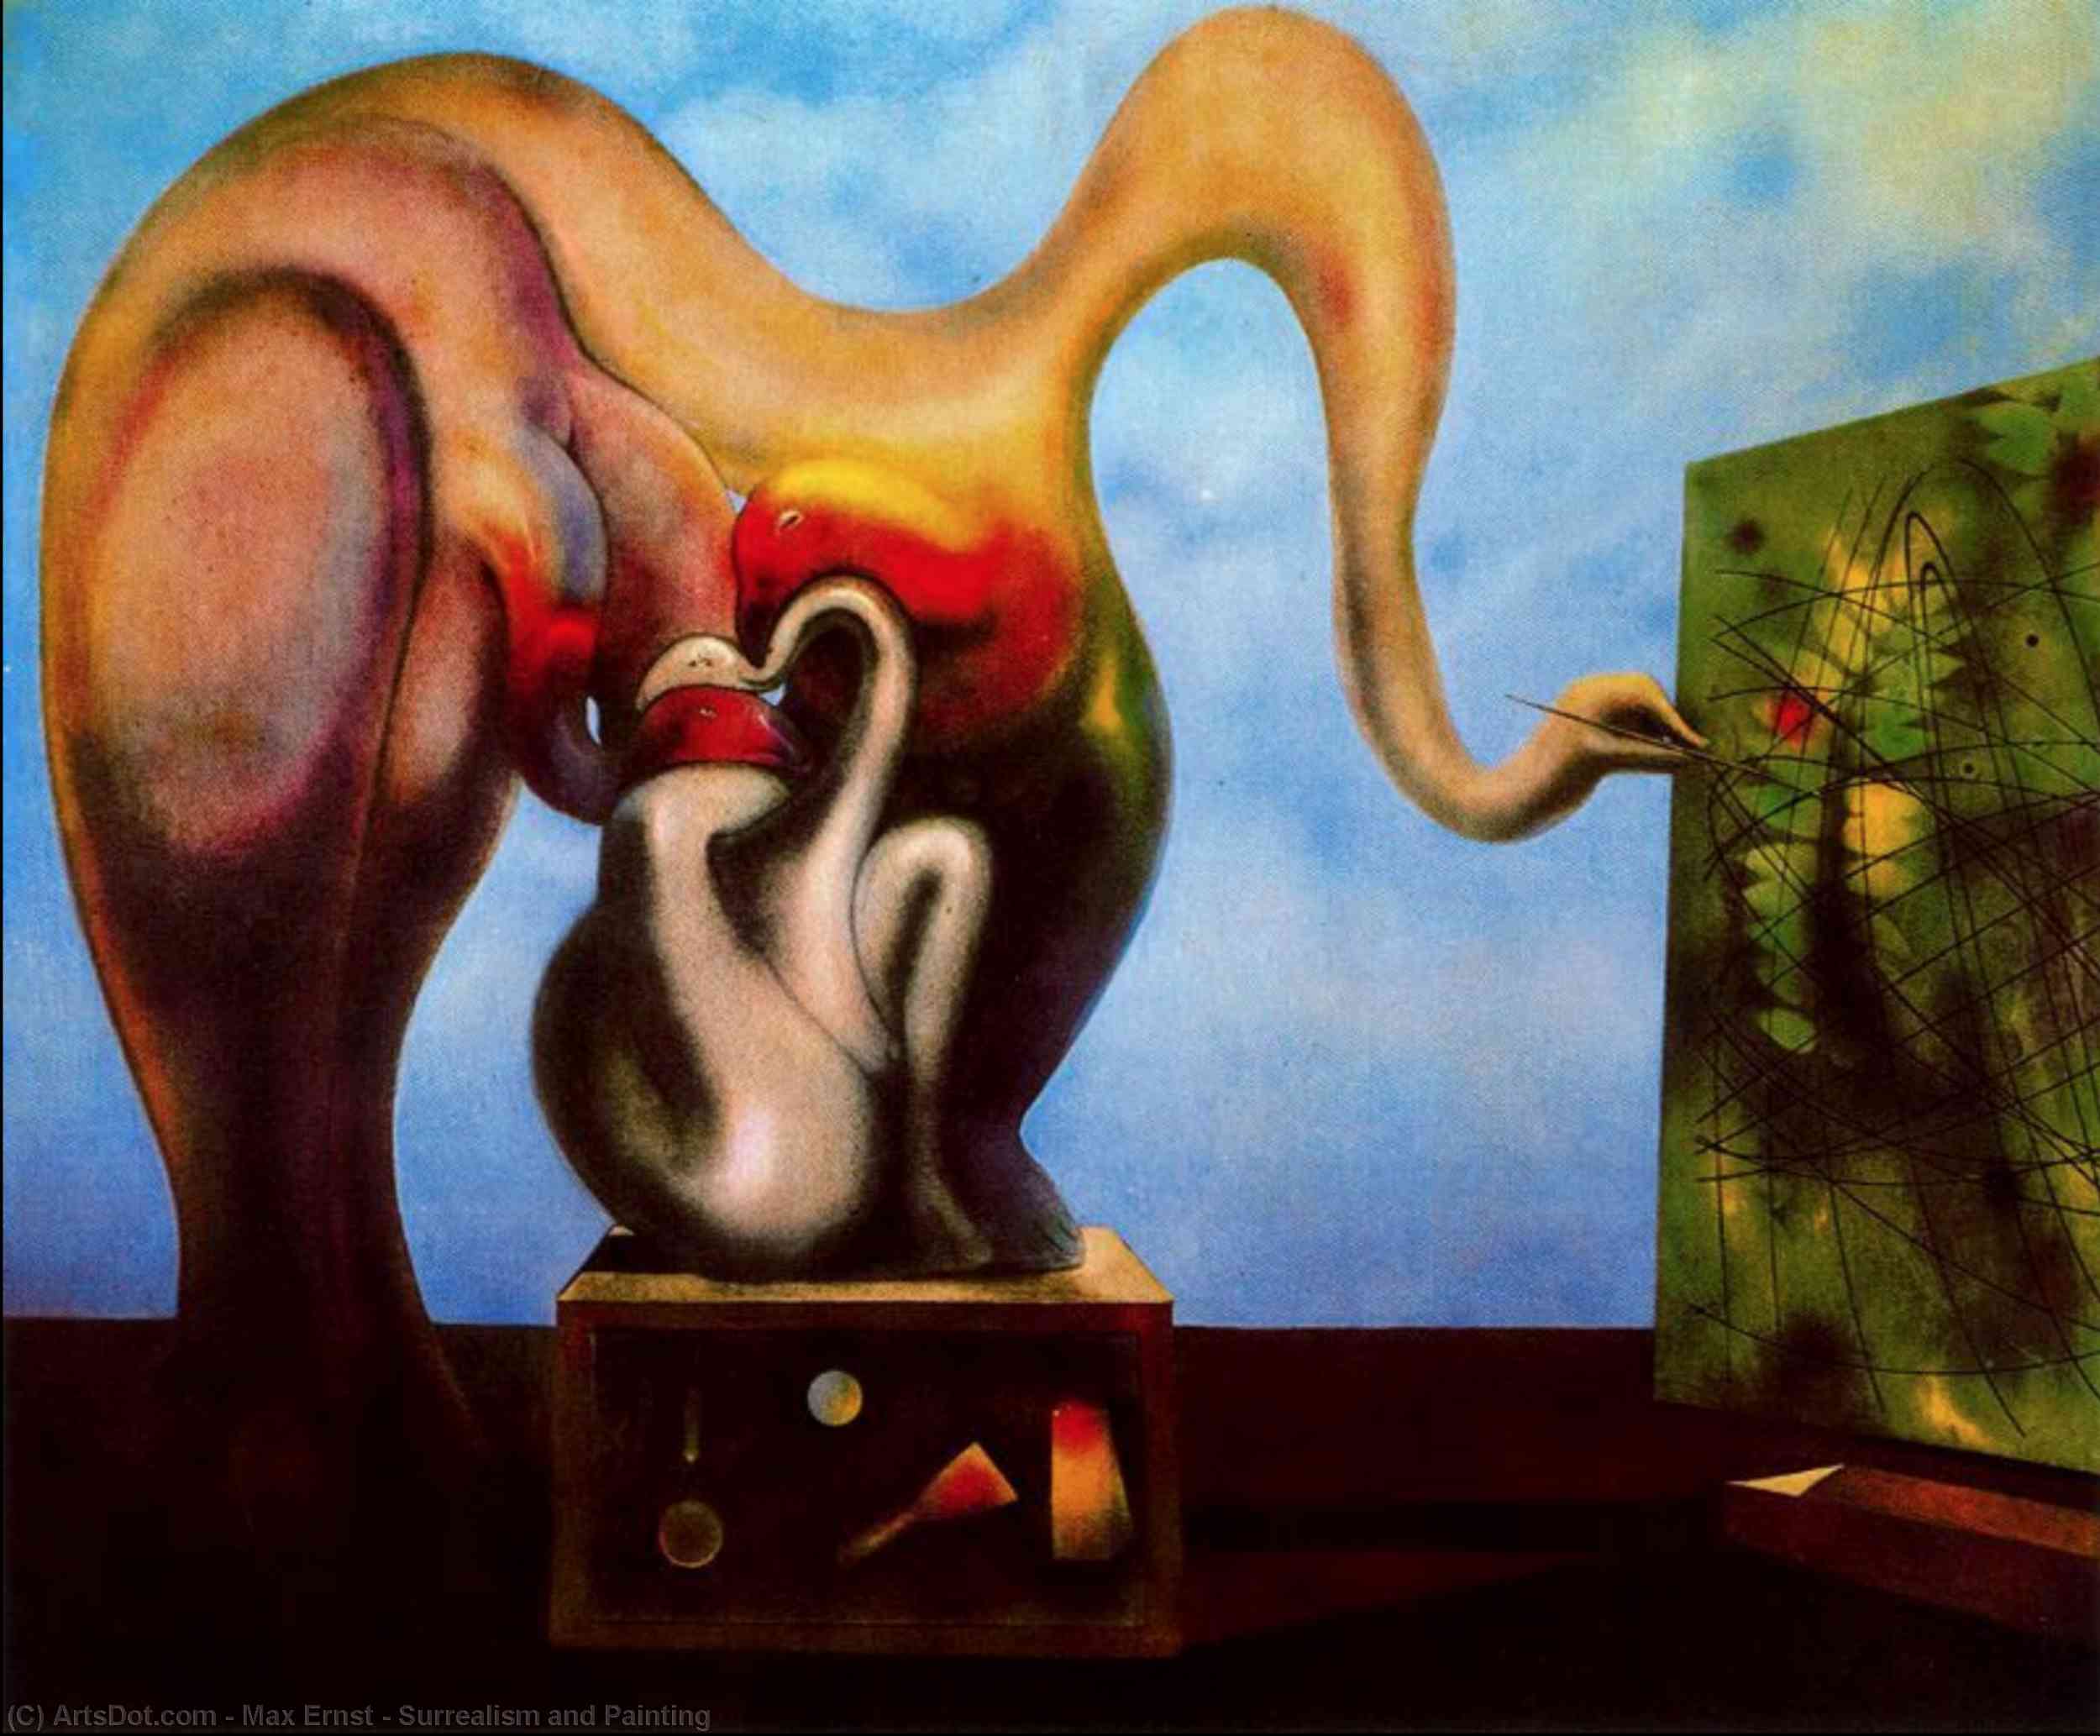 WikiOO.org - Encyclopedia of Fine Arts - Malba, Artwork Max Ernst - Surrealism and Painting